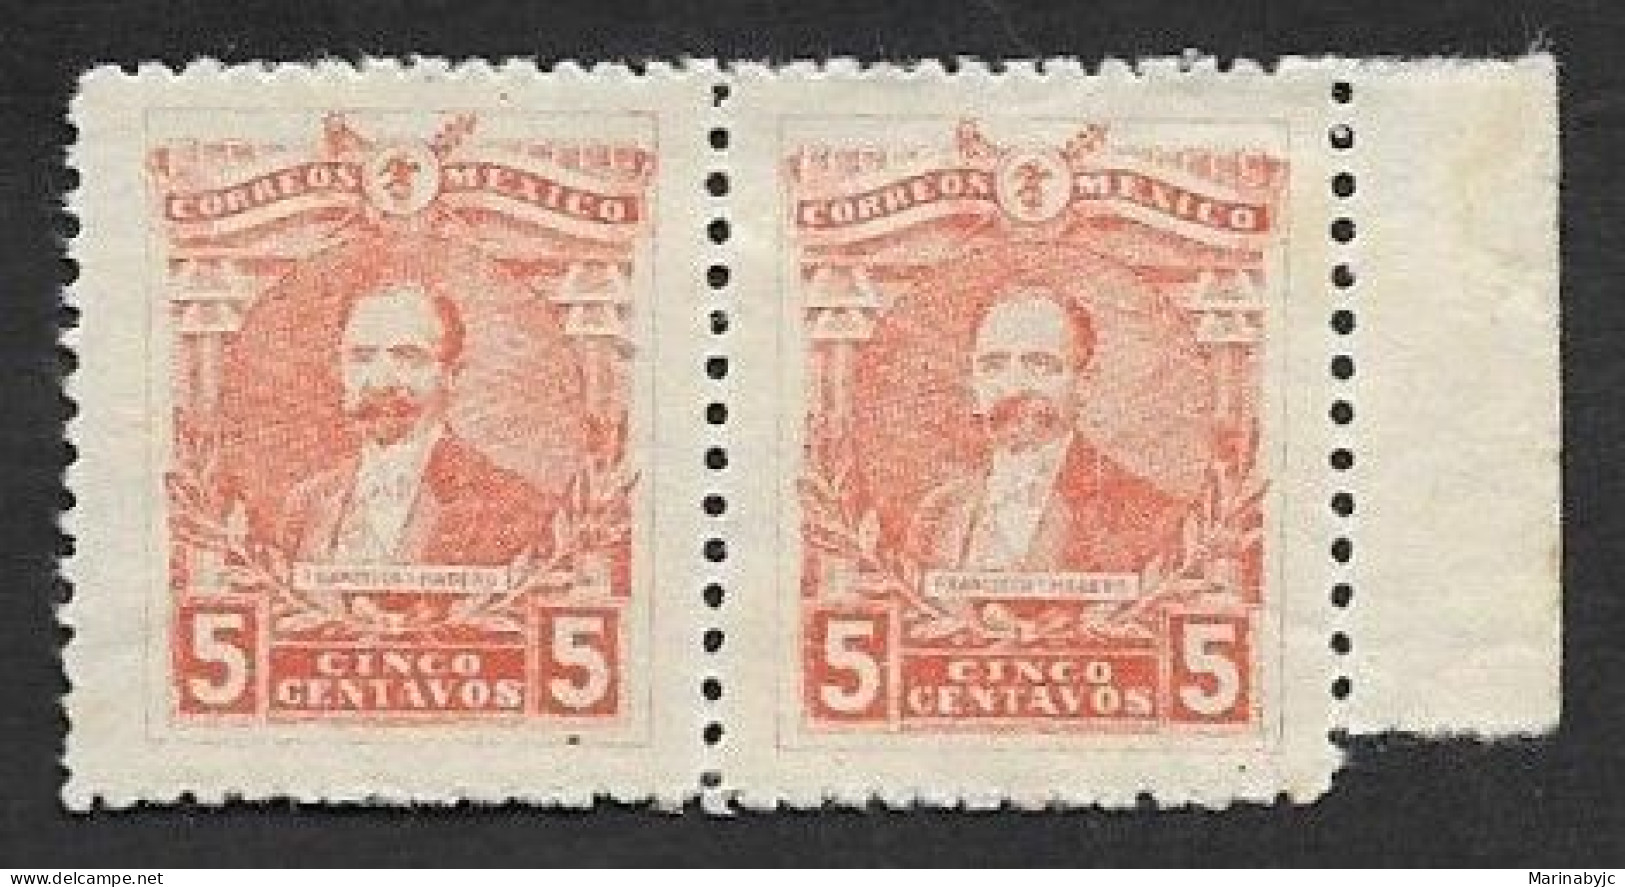 SE)1915 MEXICO, FRANCISCO MADERO 5C SCT504, STRIP OF 2 MINT STAMPS - Mexico